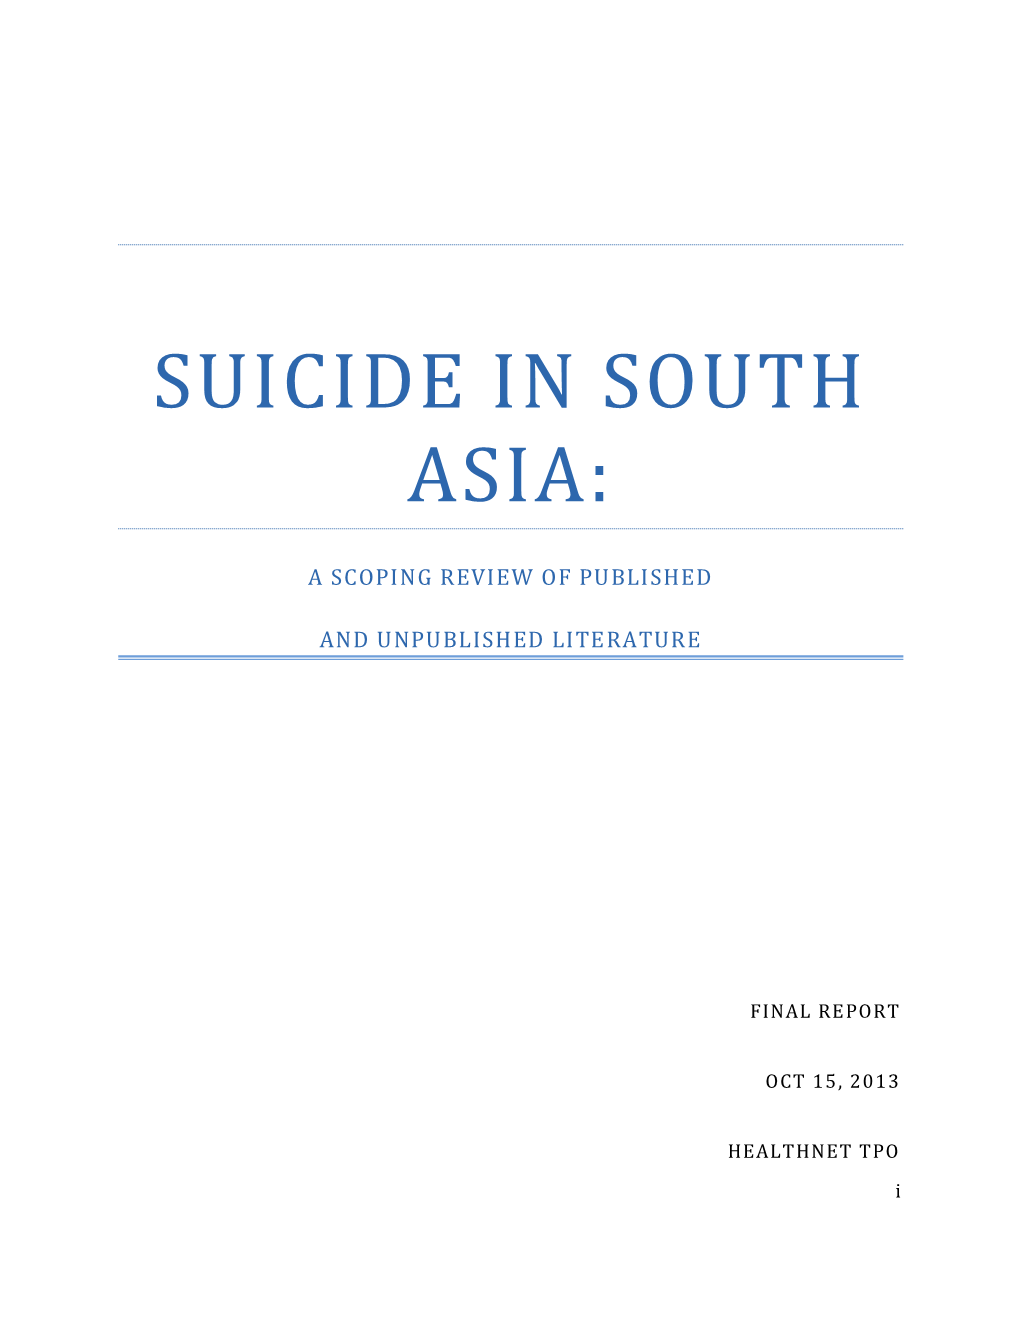 Suicide in South Asia